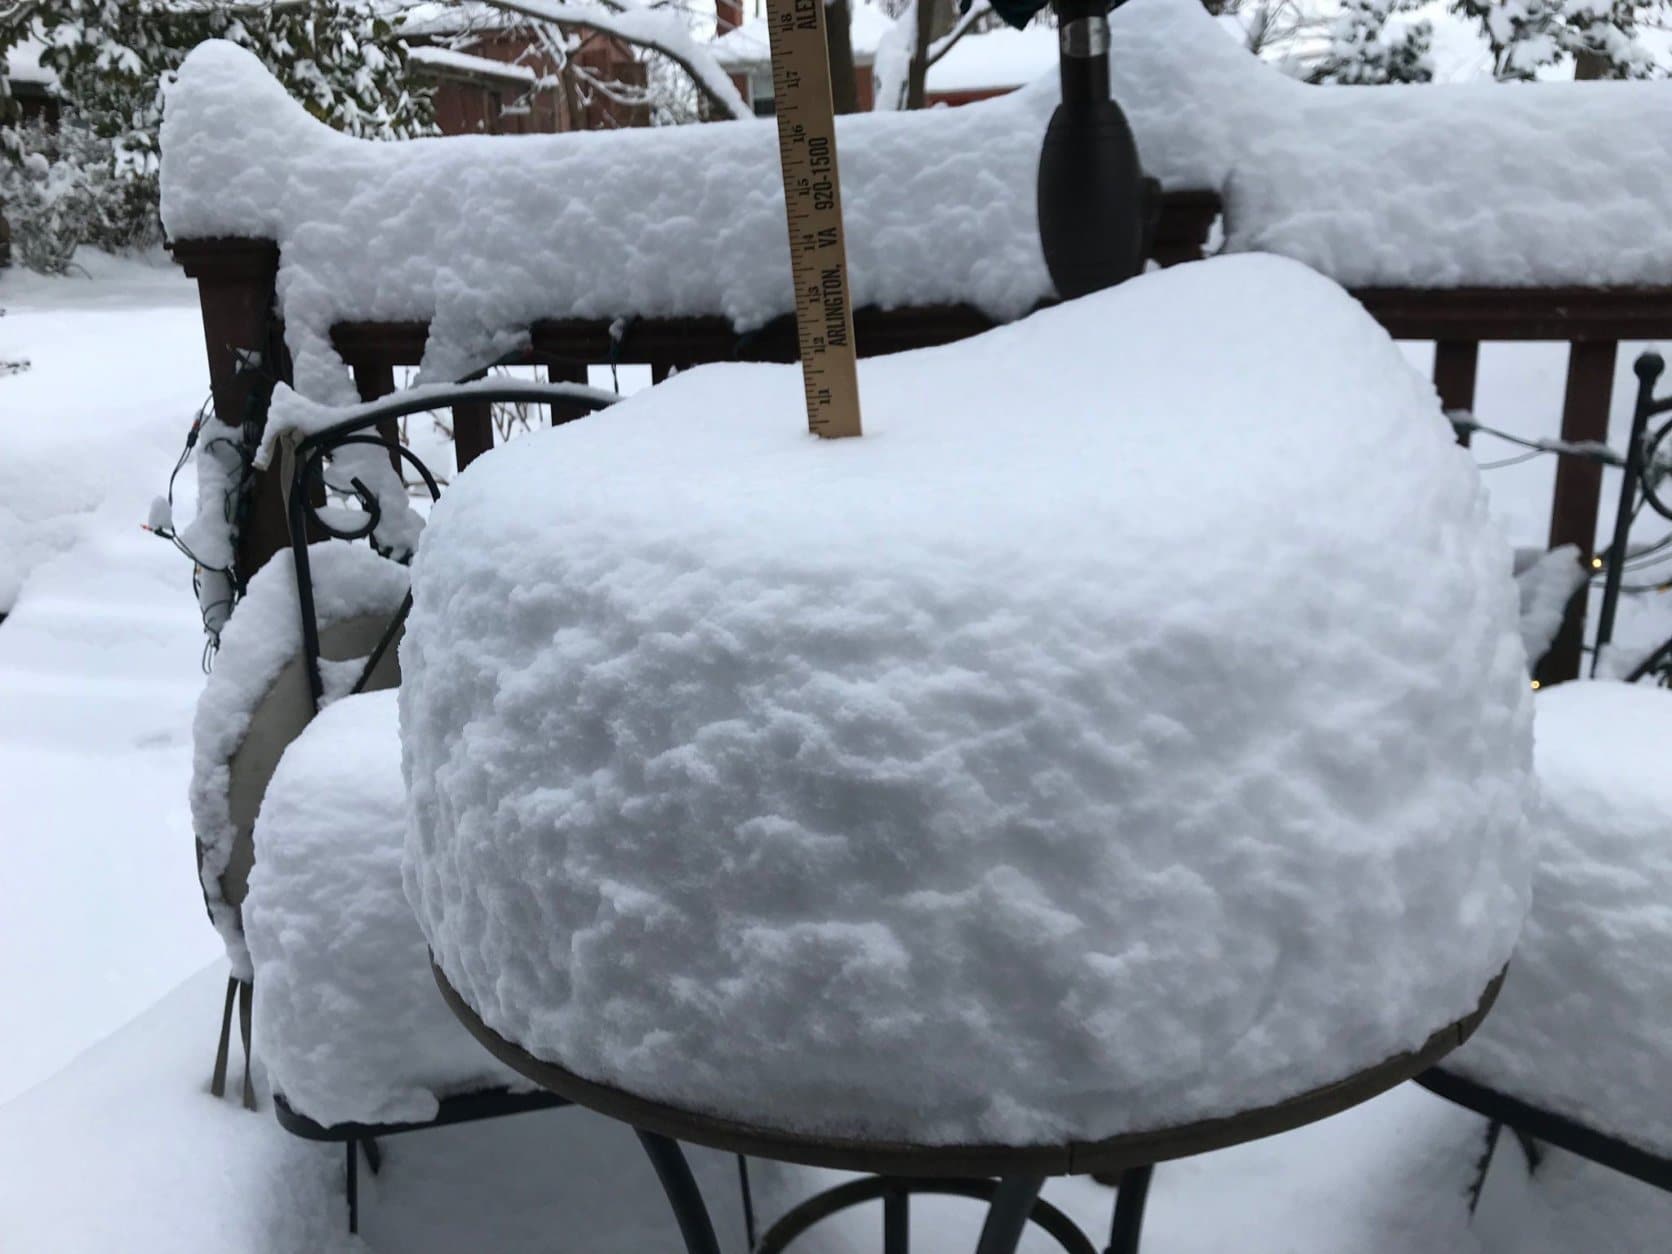 Almost 11 inches of snow on a backyard table in Bethesda. (WTOP/Dick Uliano)